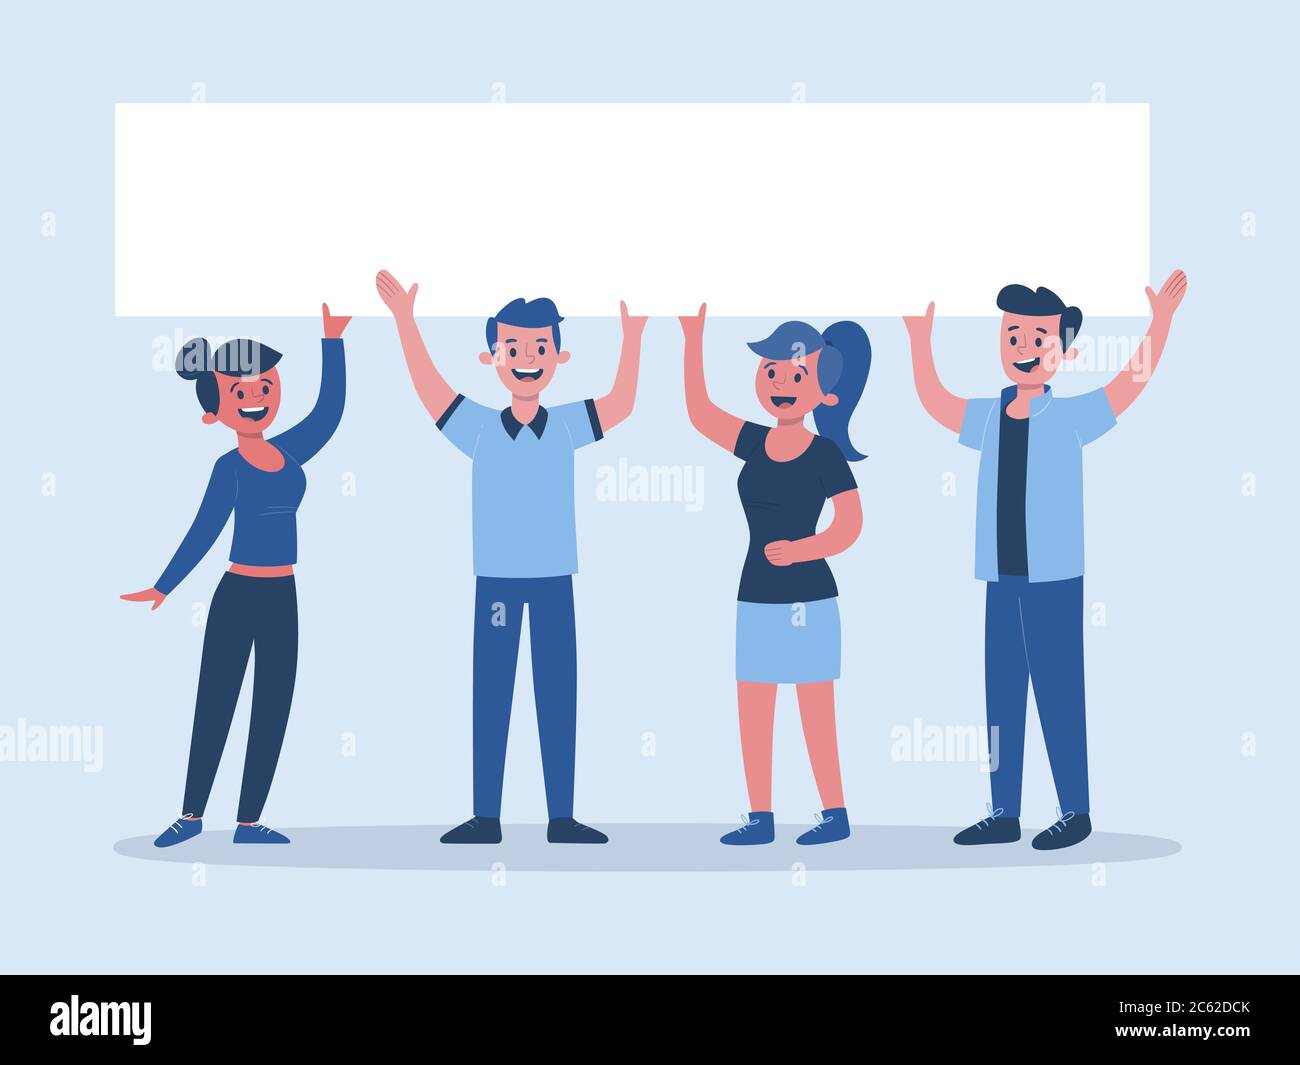 People holding a banner above their heads. Two women and two men. Vector illustration isolated on light blue background. Stock Vector